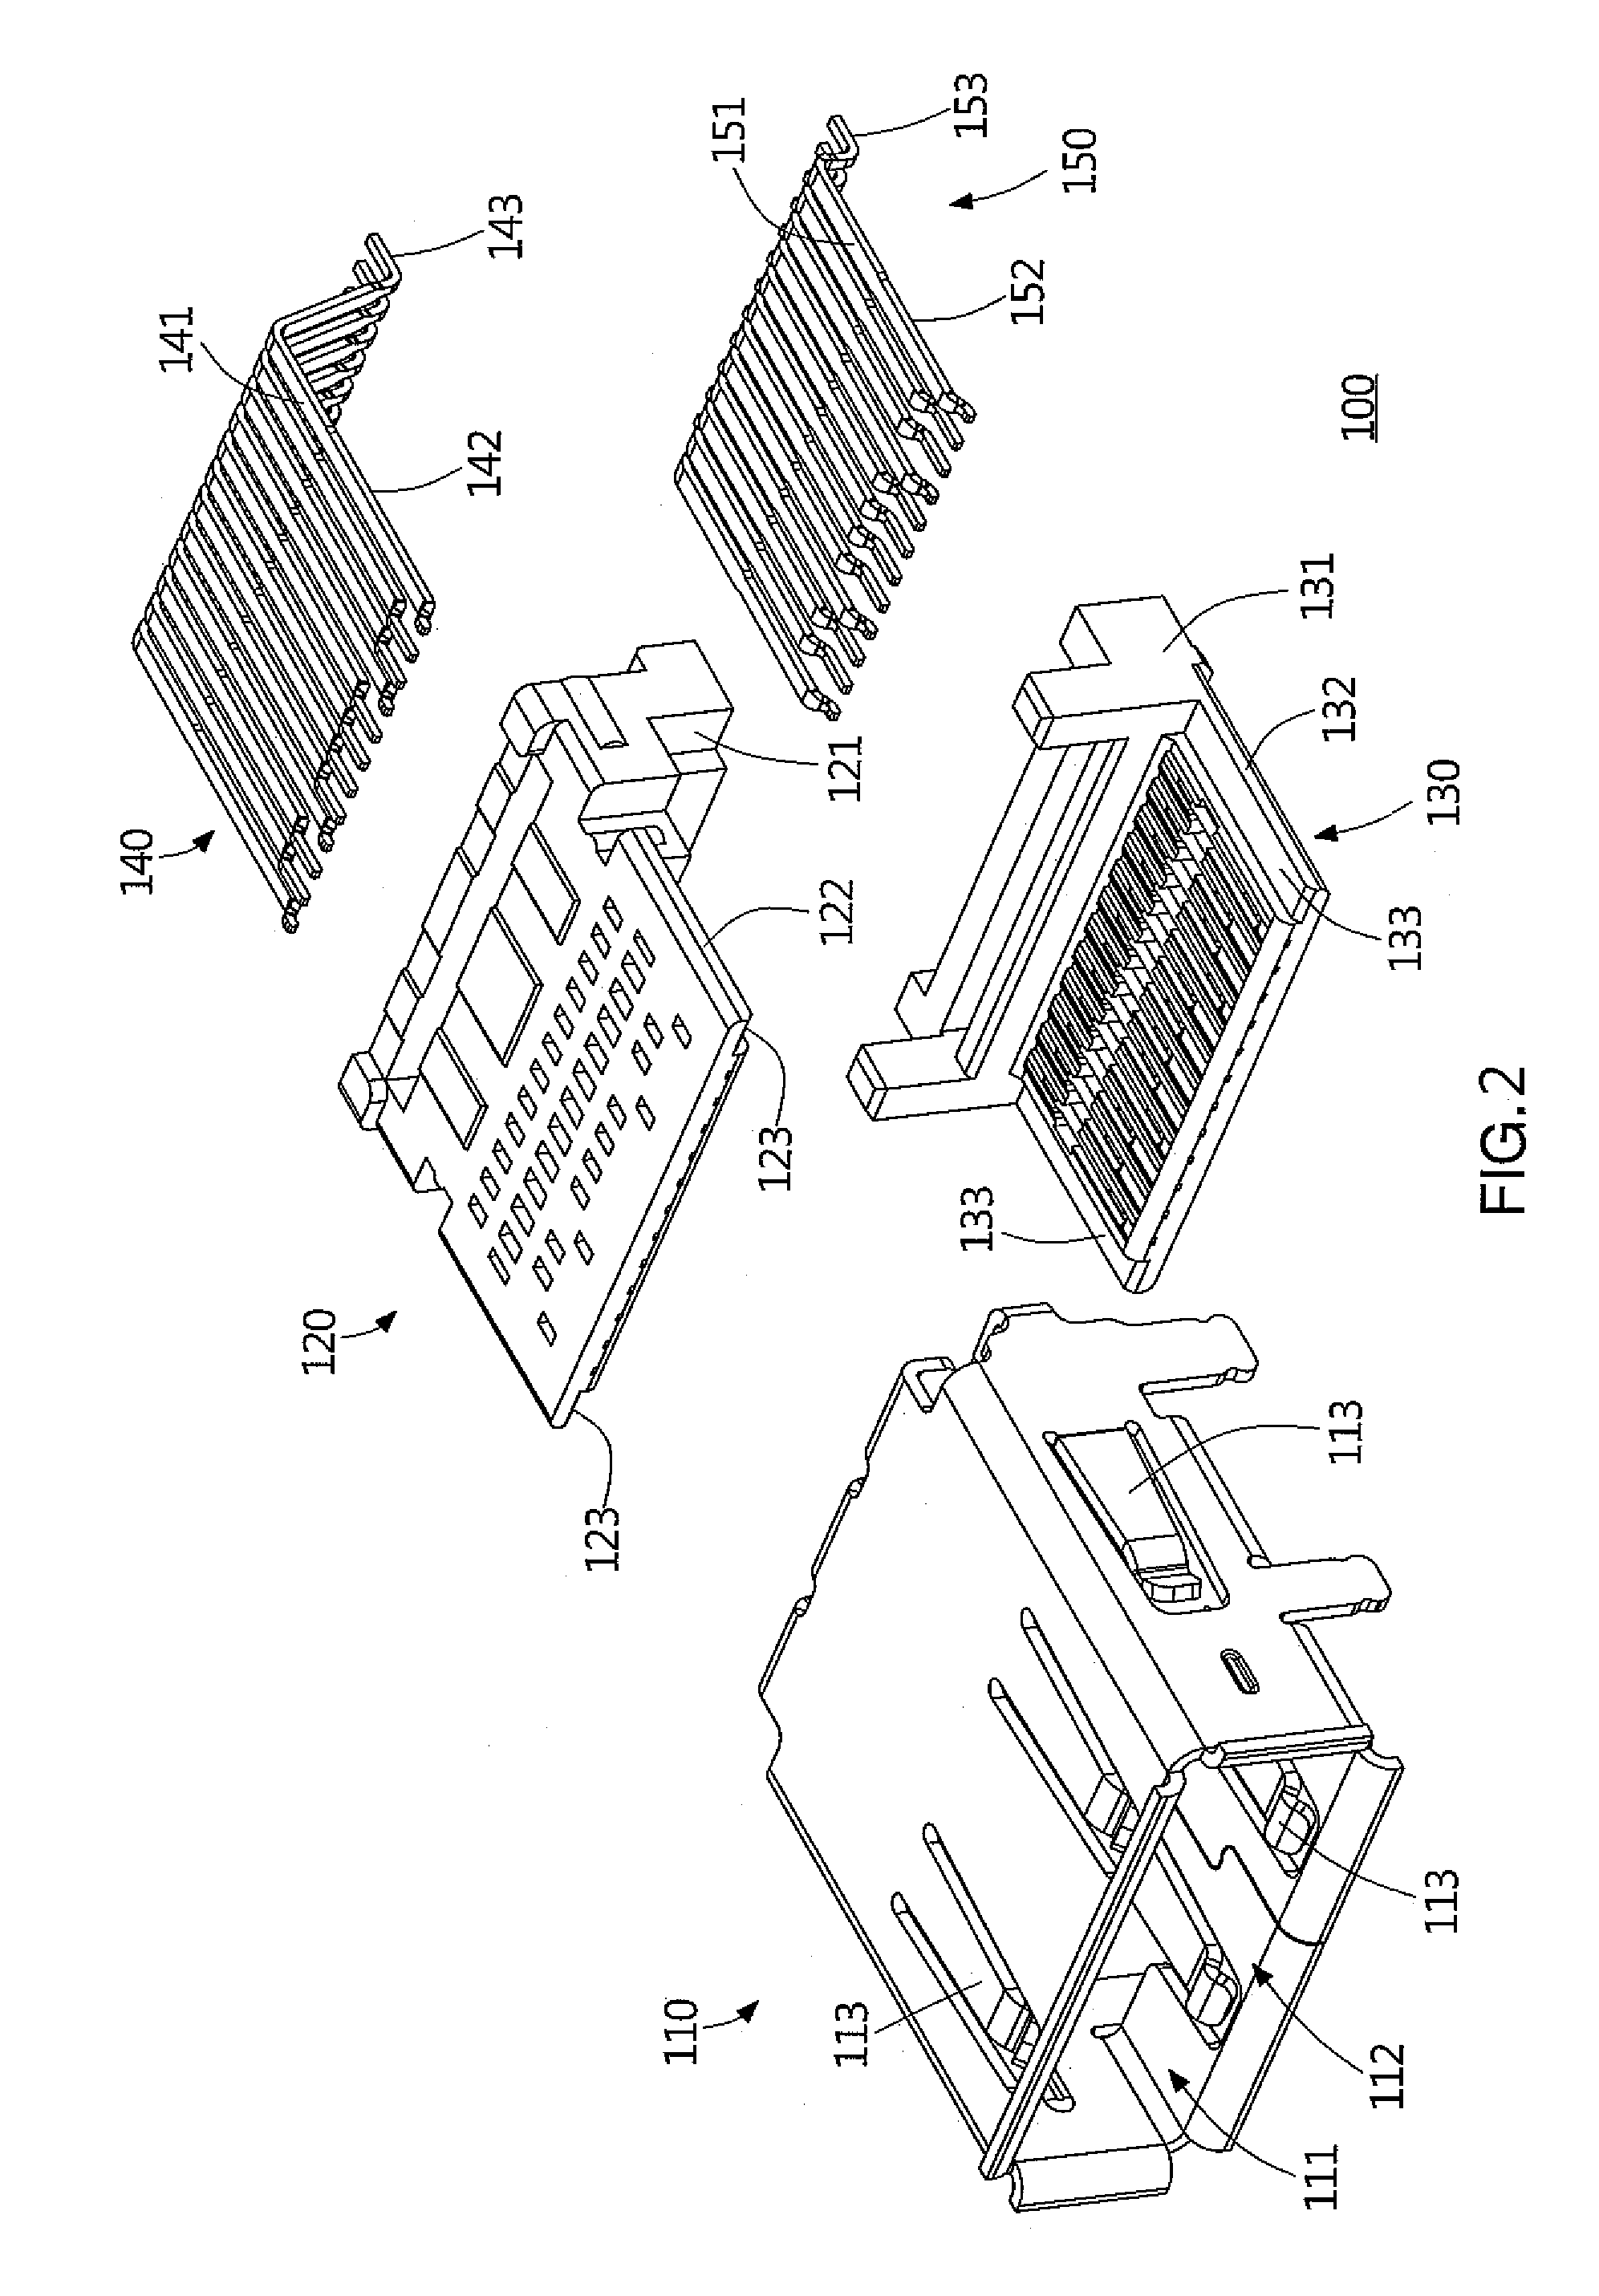 Receptacle of electrical connector